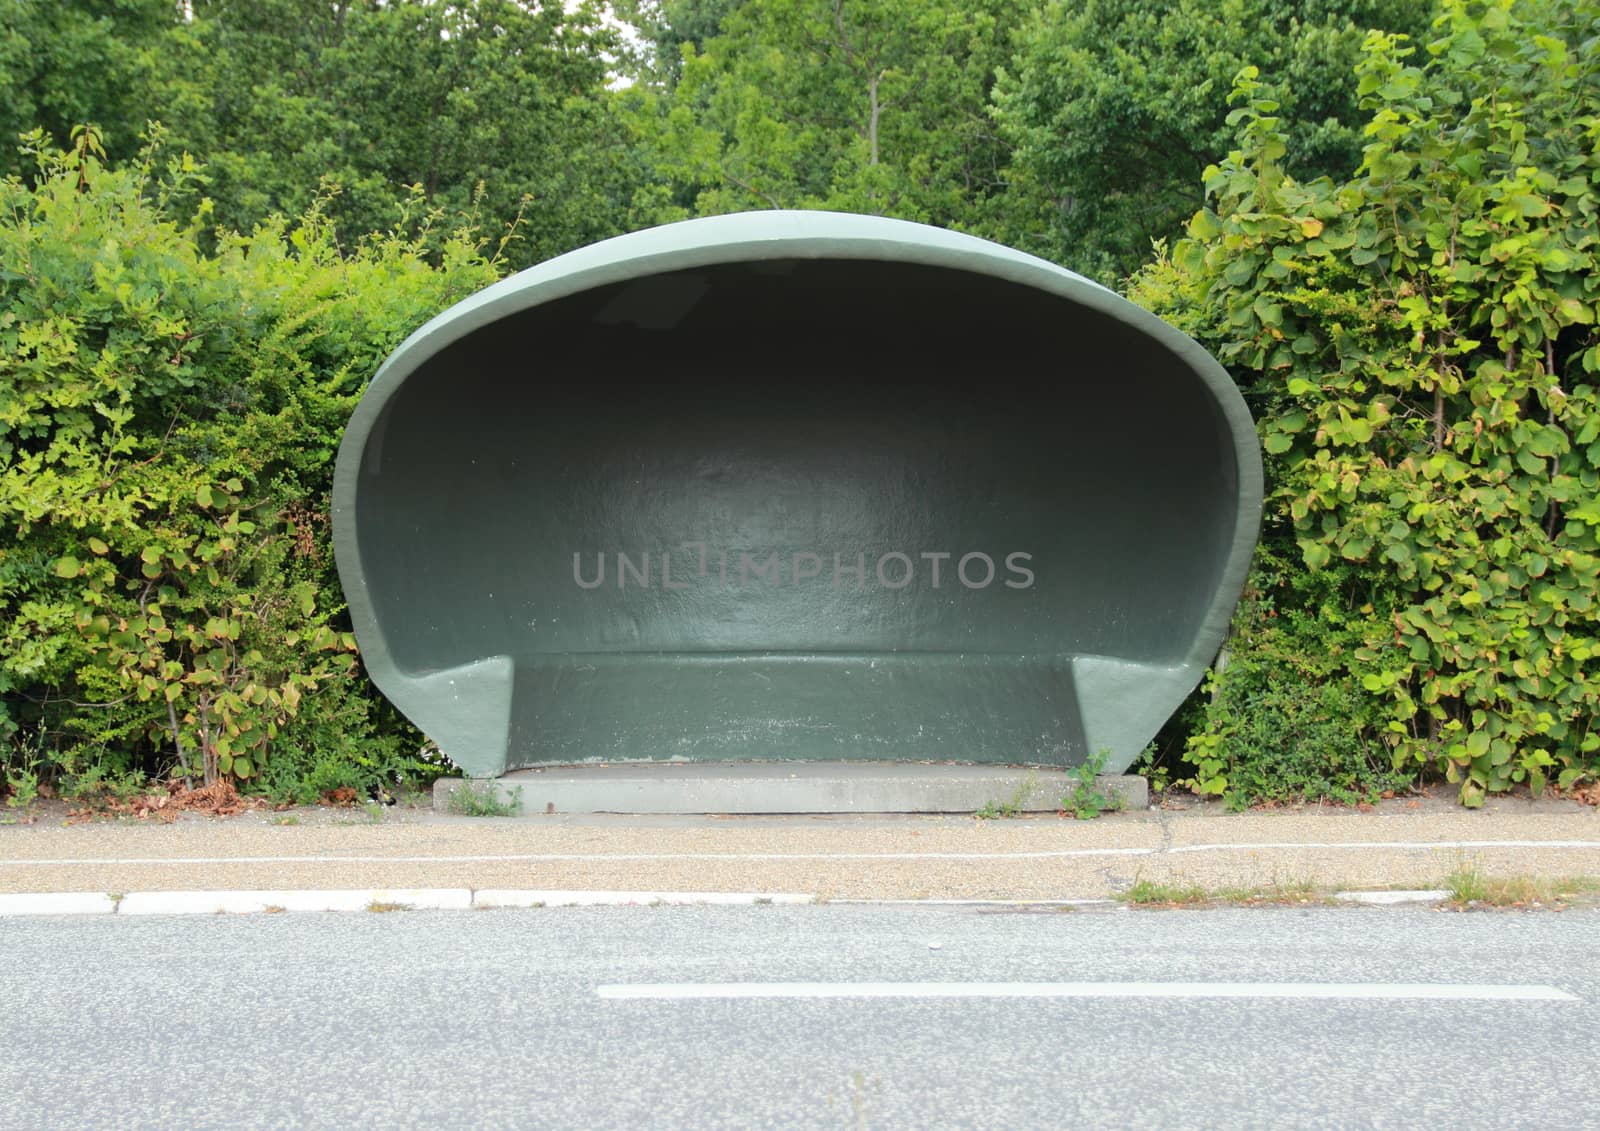 Special danish weather shelter at bus stop